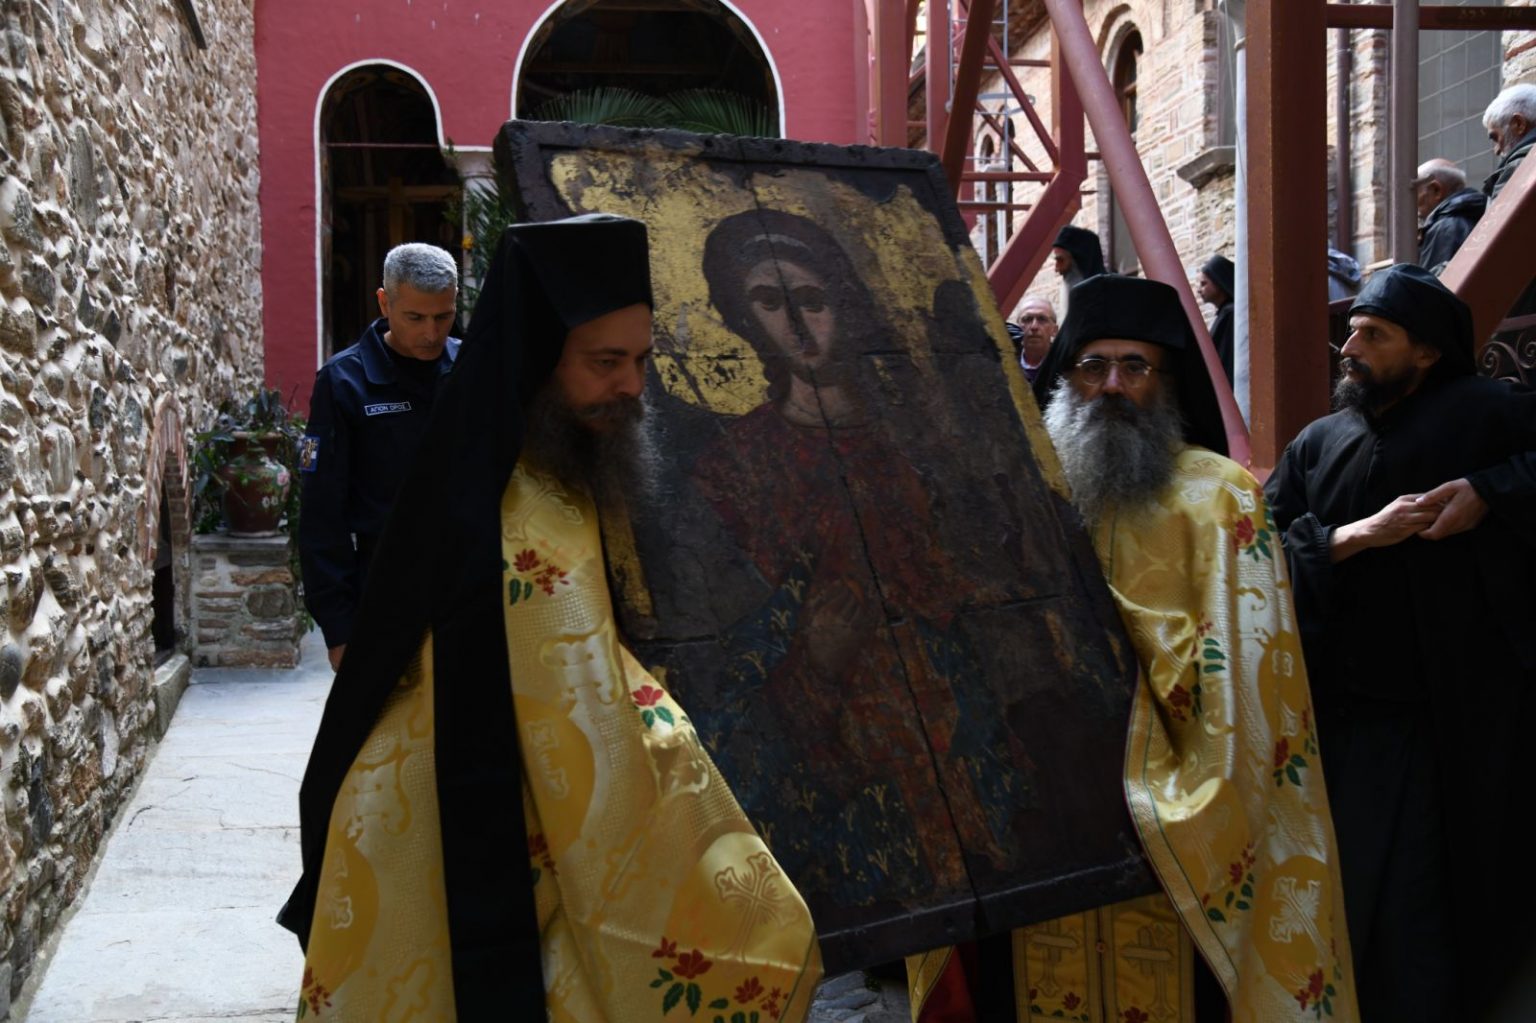 Feast Day of the Holy Docheiariou Monastery of Mount Athos